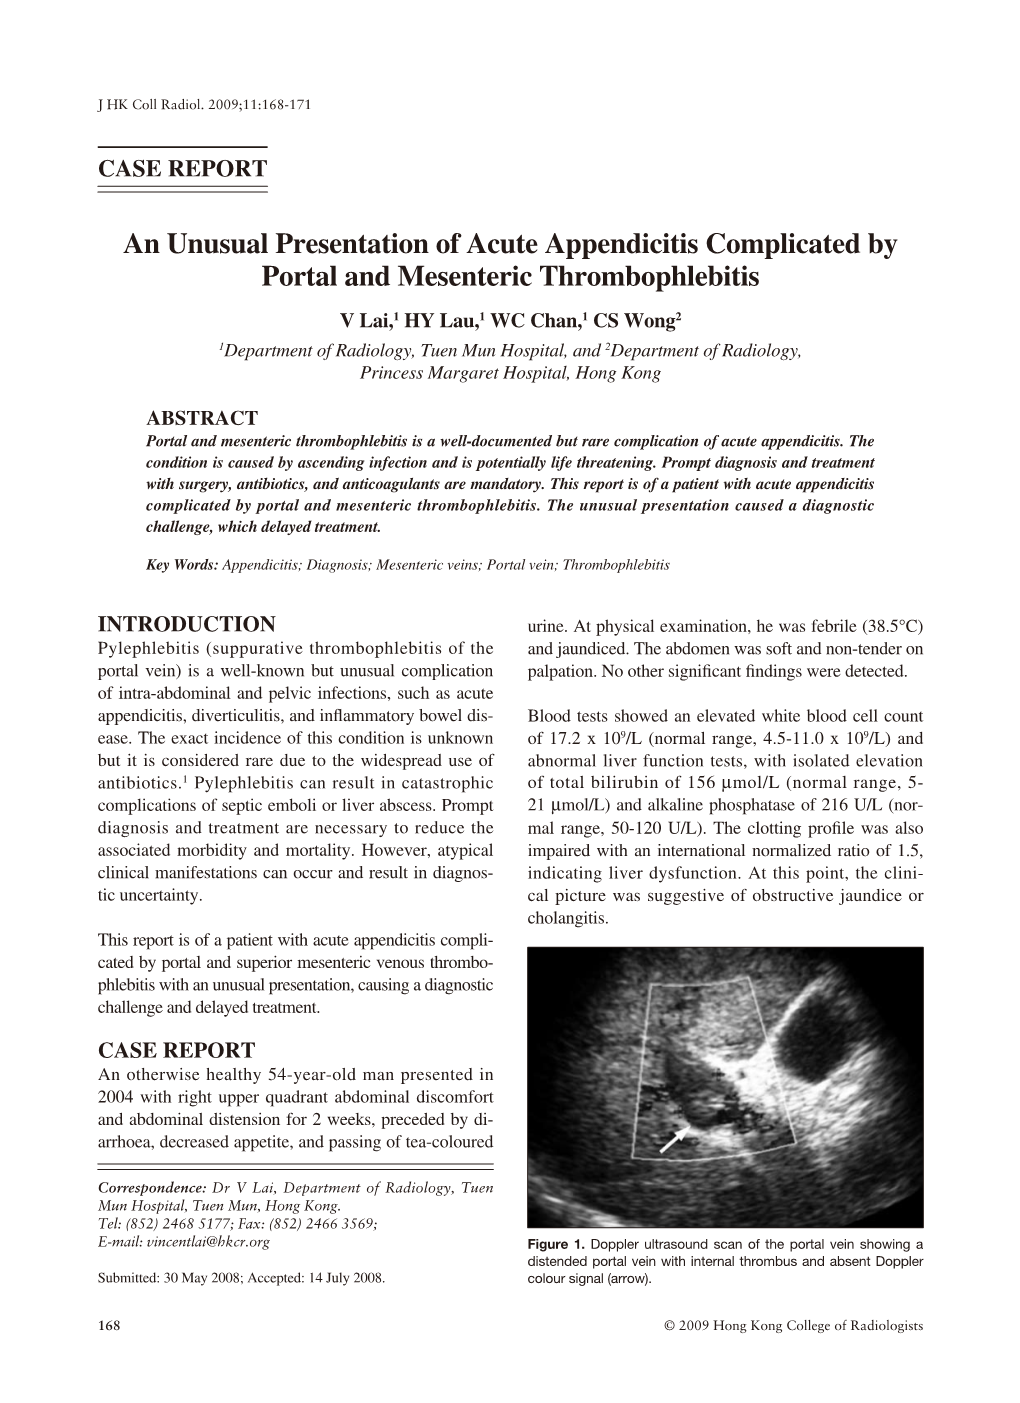 An Unusual Presentation of Acute Appendicitis Complicated by Portal